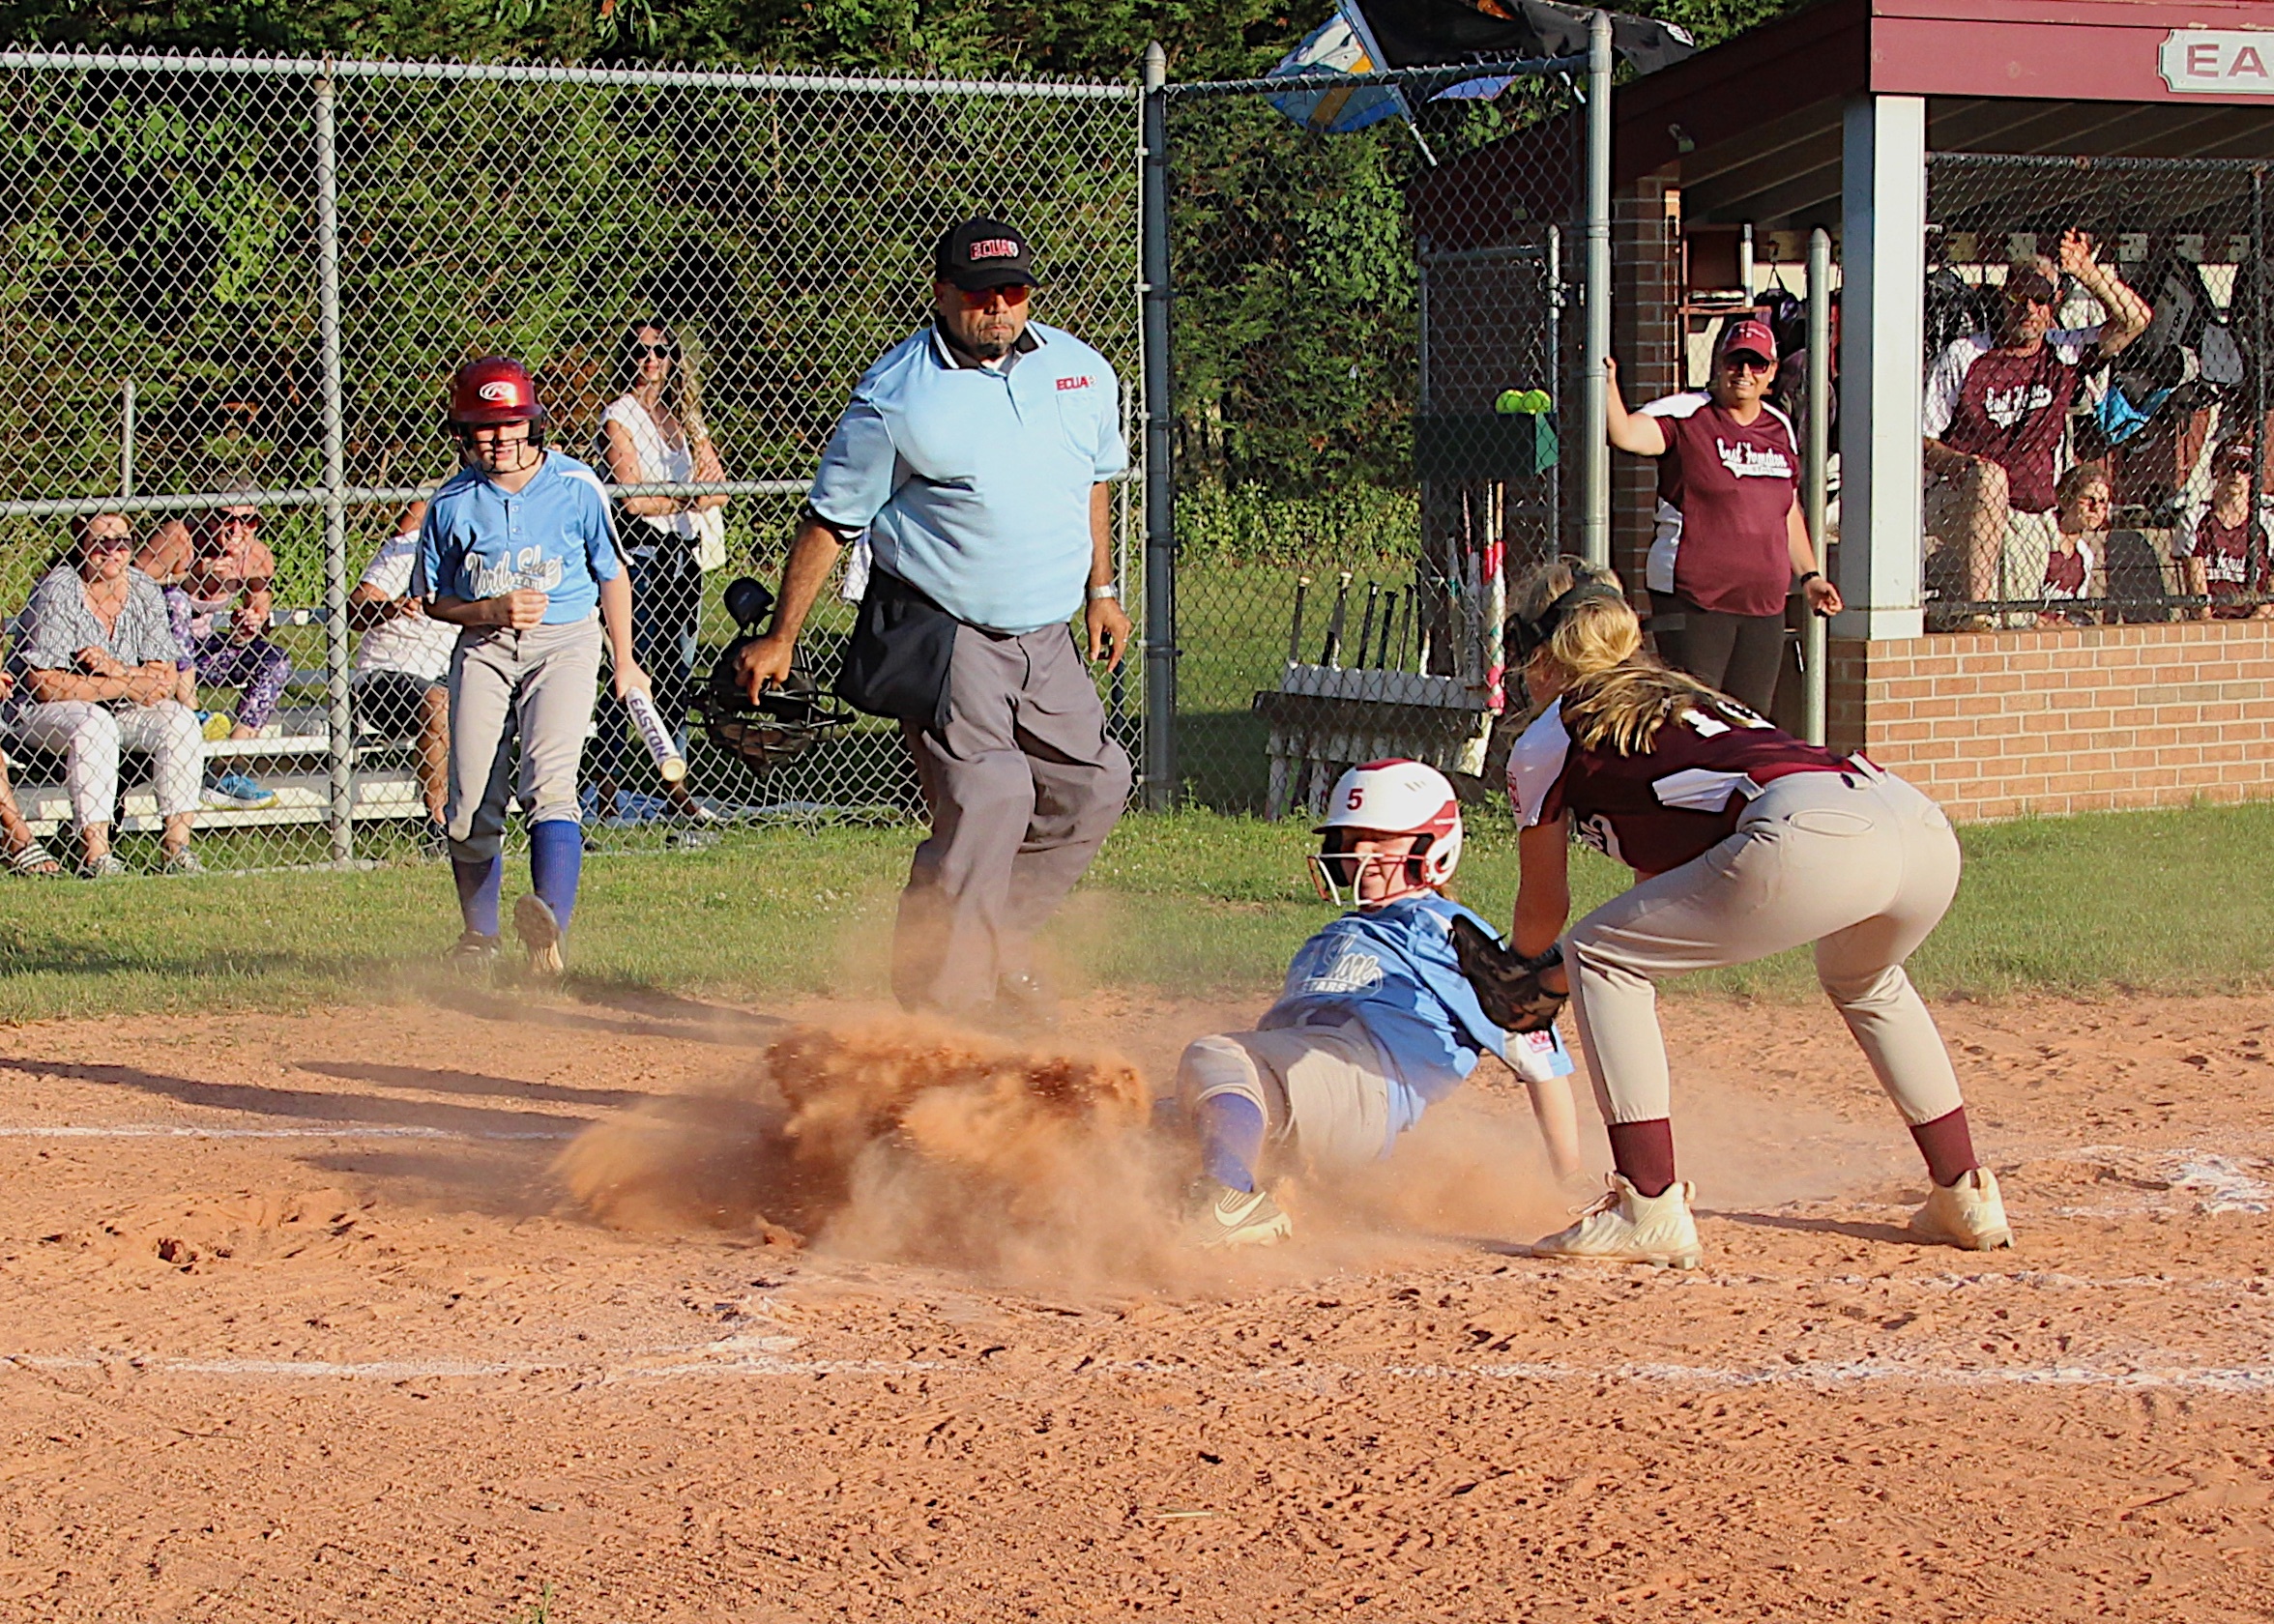 Lydia Rowan tries to tag out a North Shore player attempting to score.